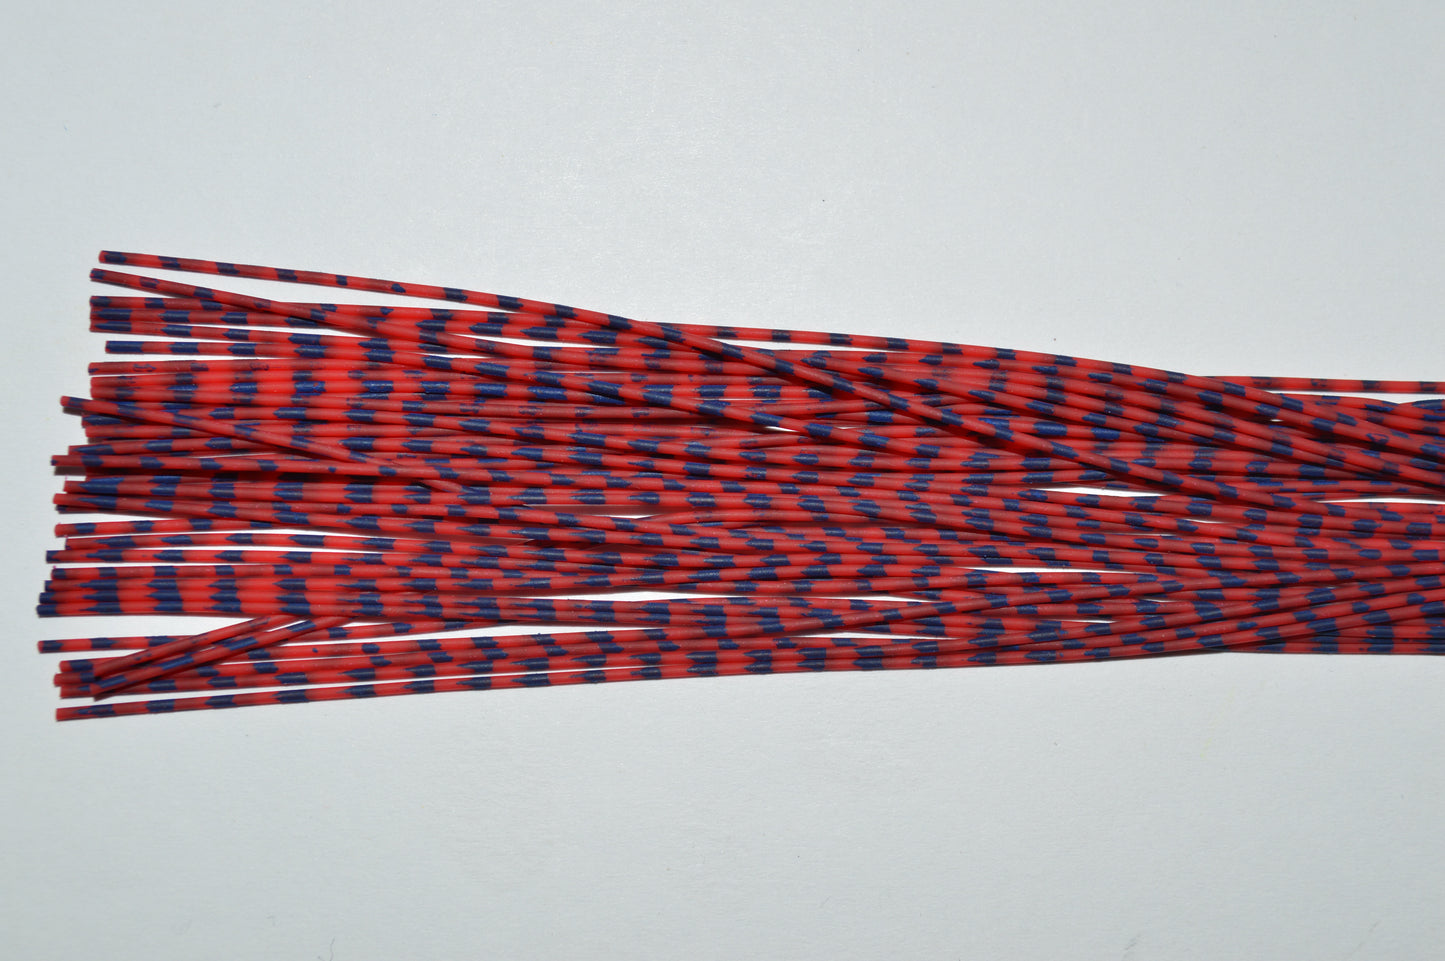 Medium Reptile Rubber Red with Blue Print G-01